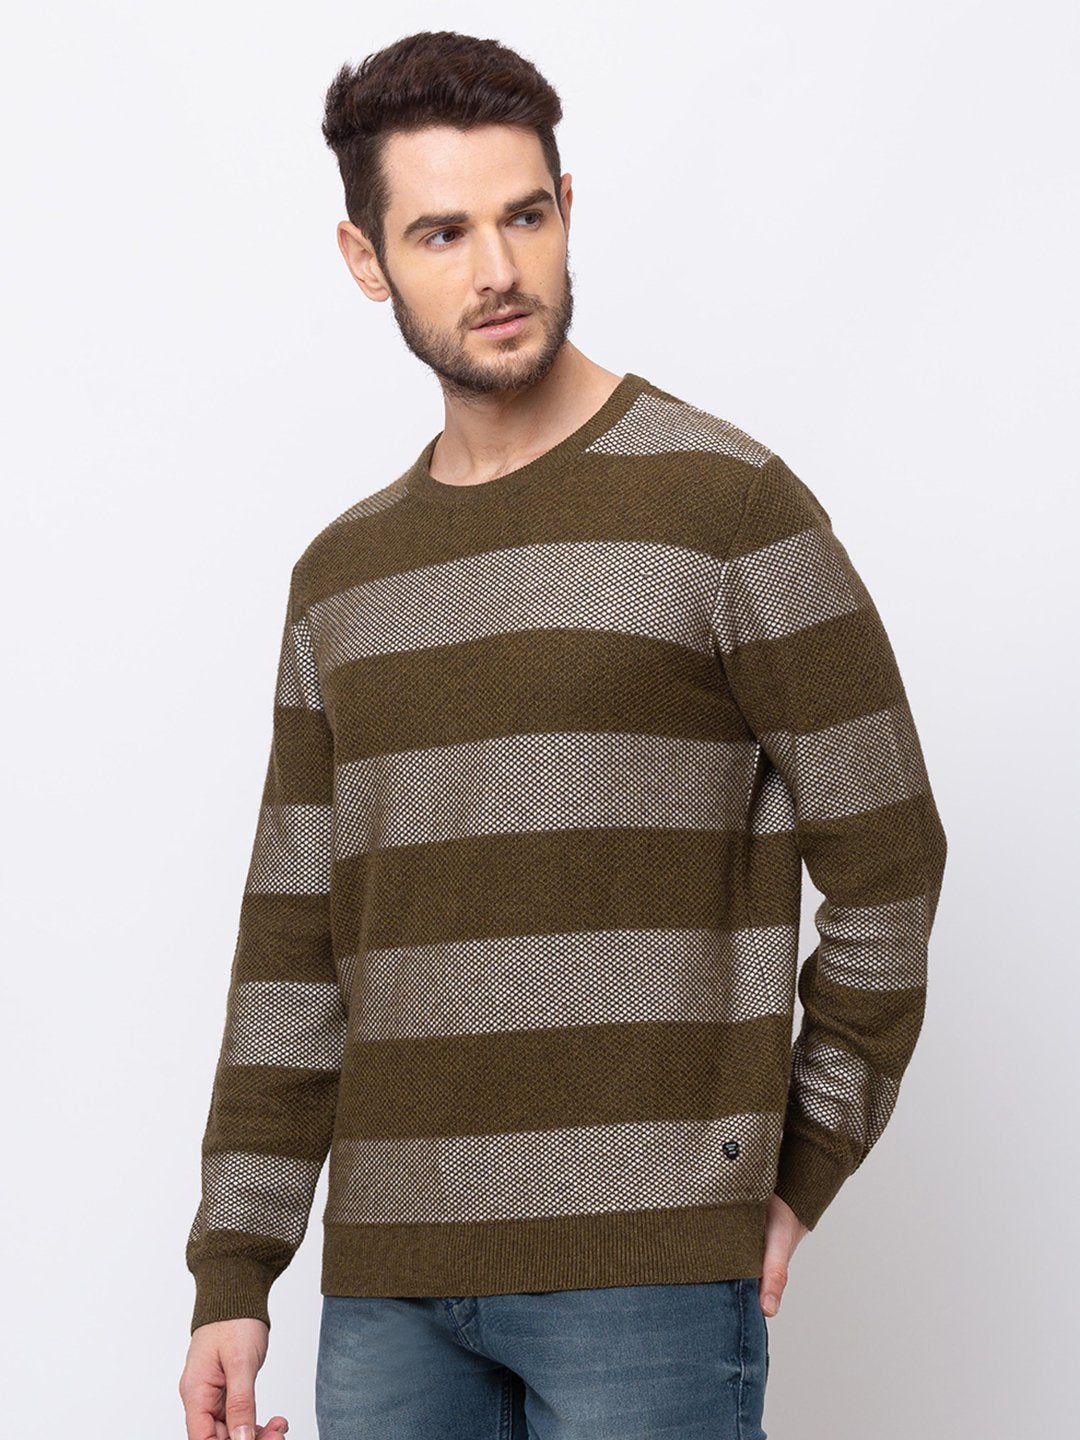 Stripped Sweater